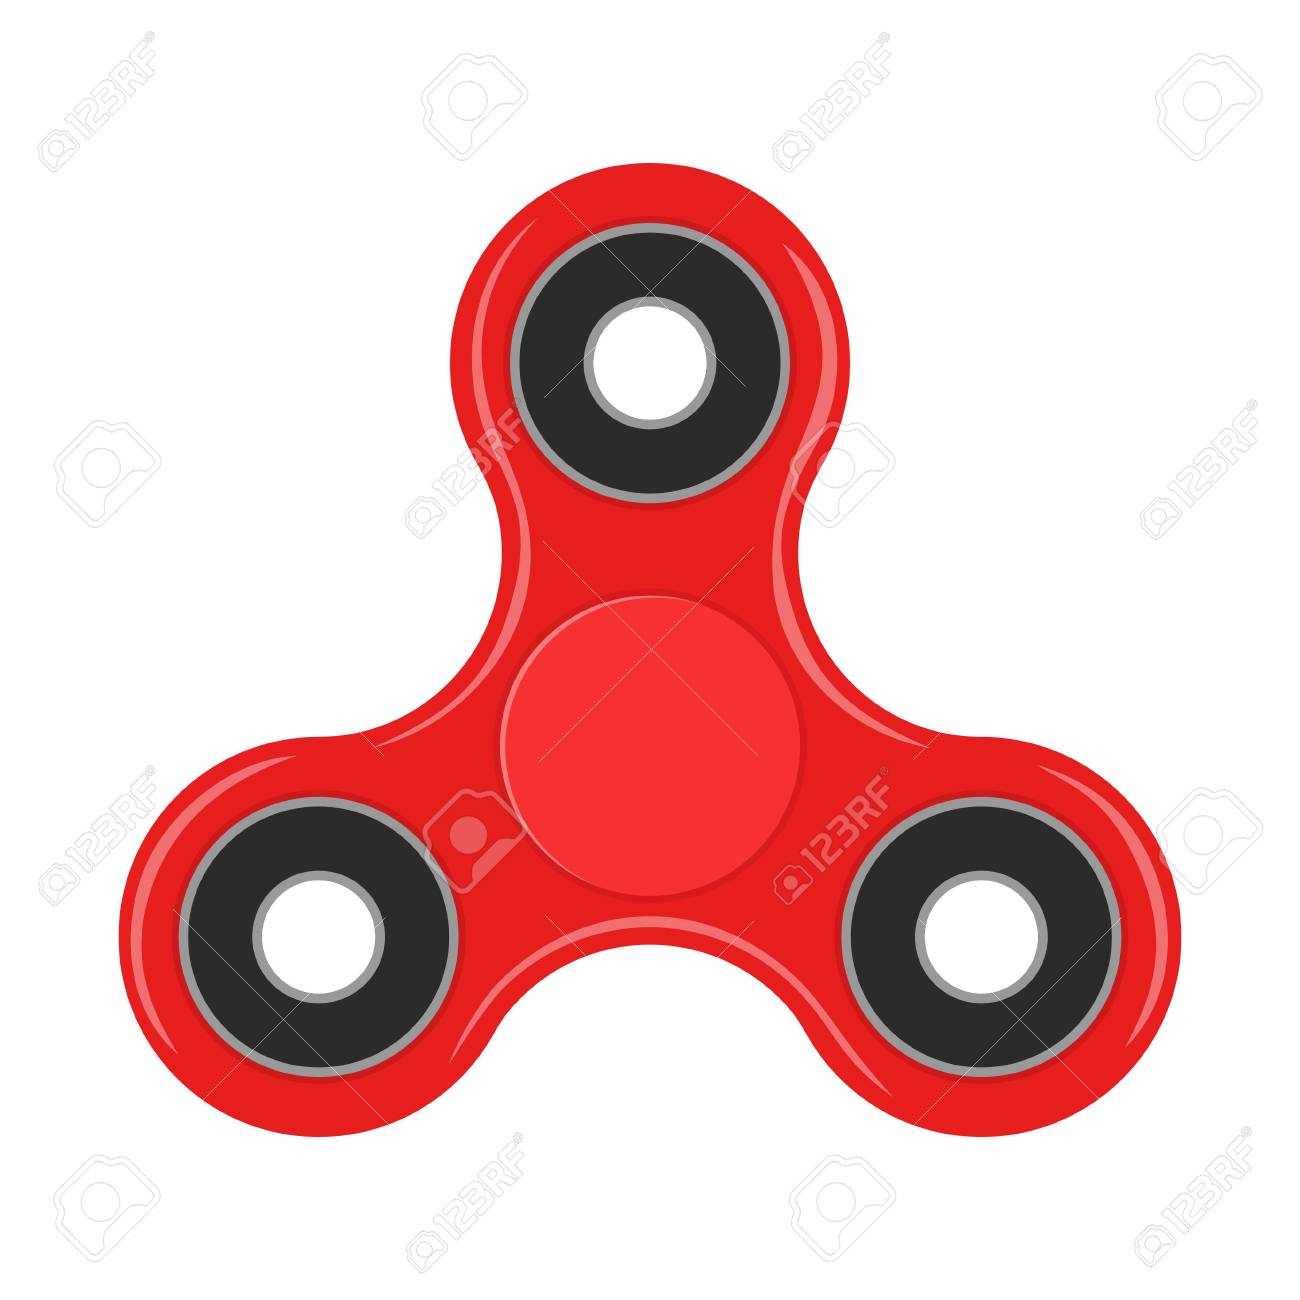 Fidget spinner isolated on white background. Stress relieving,...